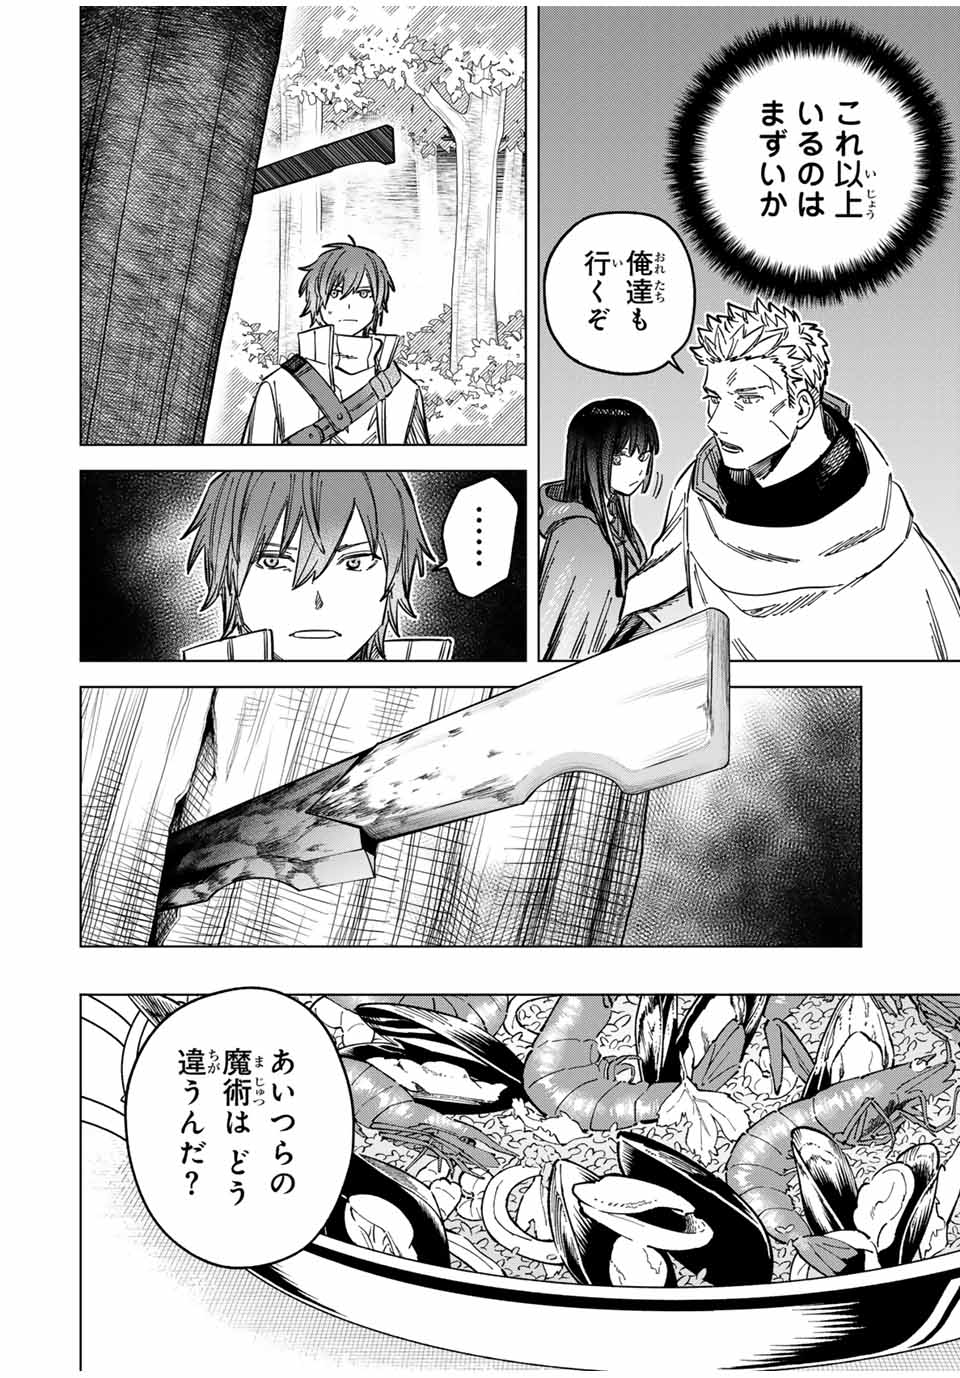 Witch and Mercenary 魔女と傭兵 第6話 - Page 8